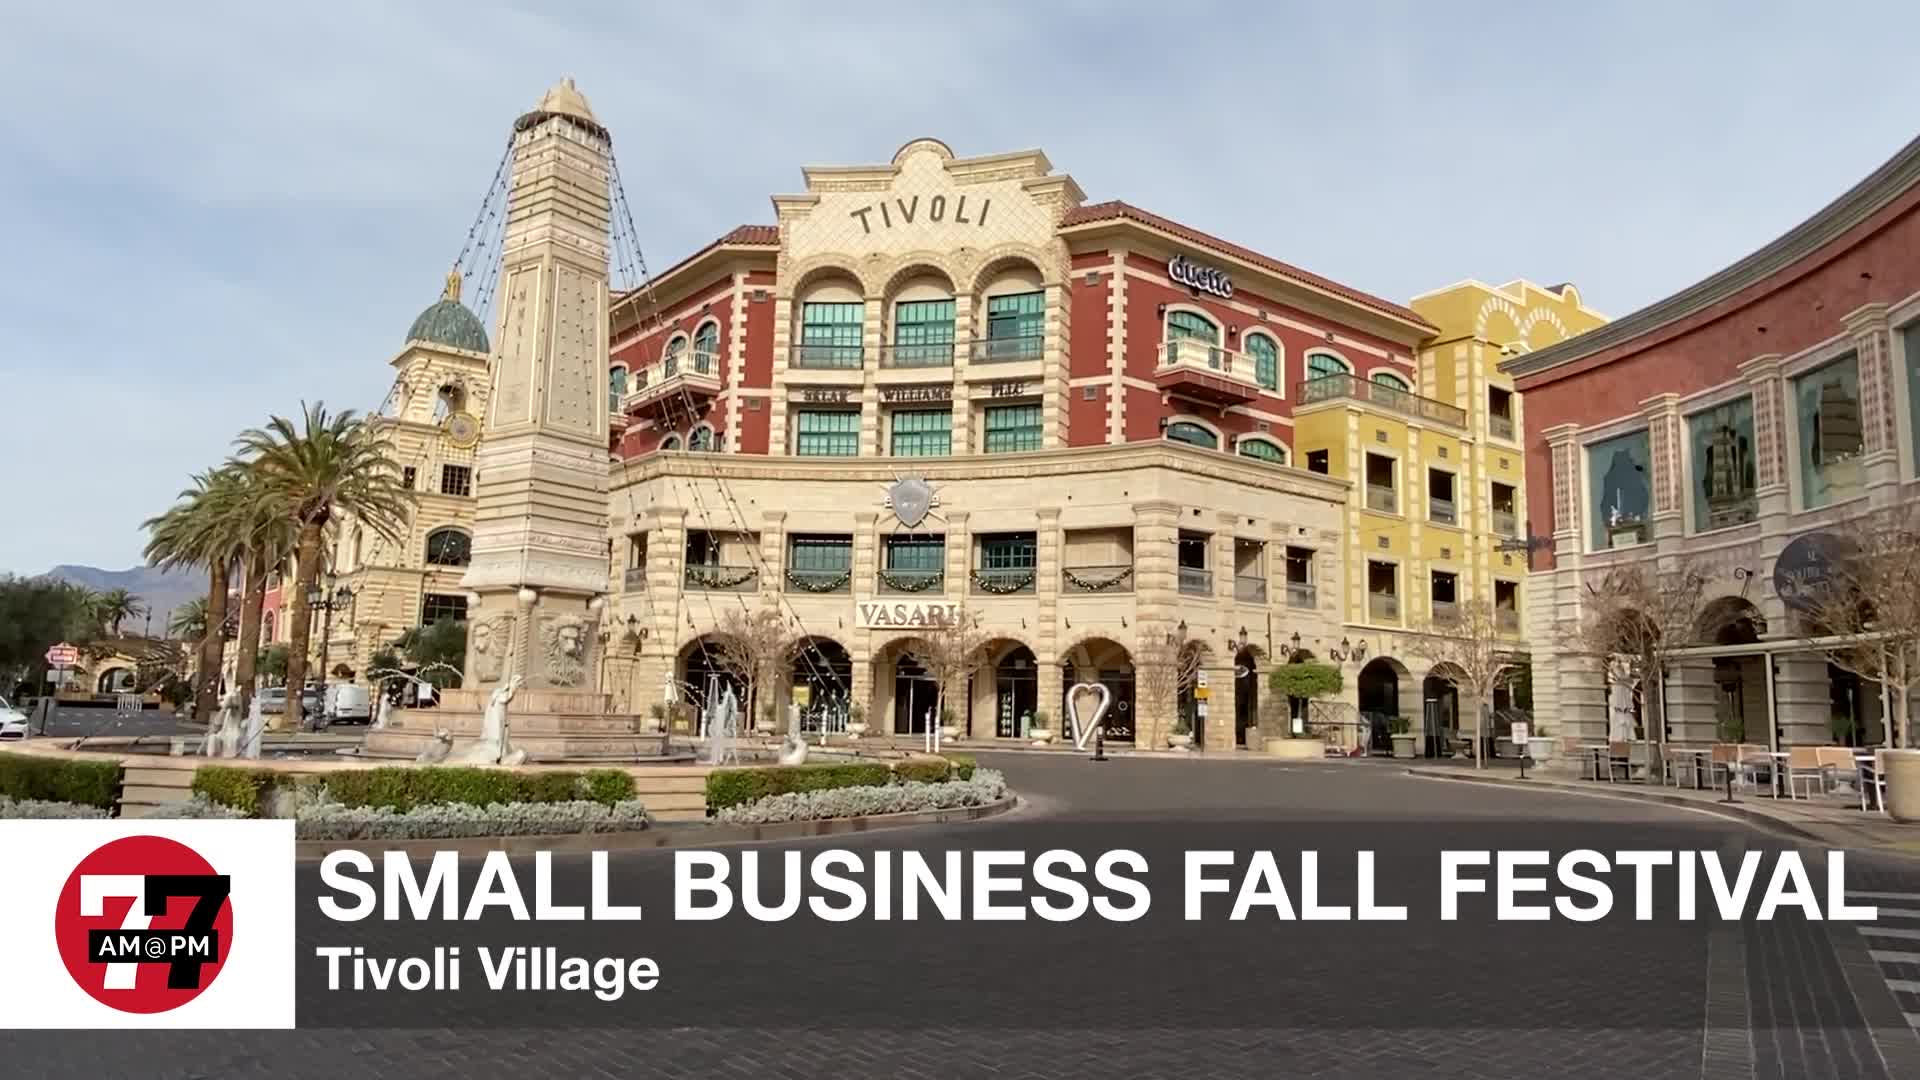 Small Business Fall Festival at Tivoli Village, Target Closed for Thanksgiving